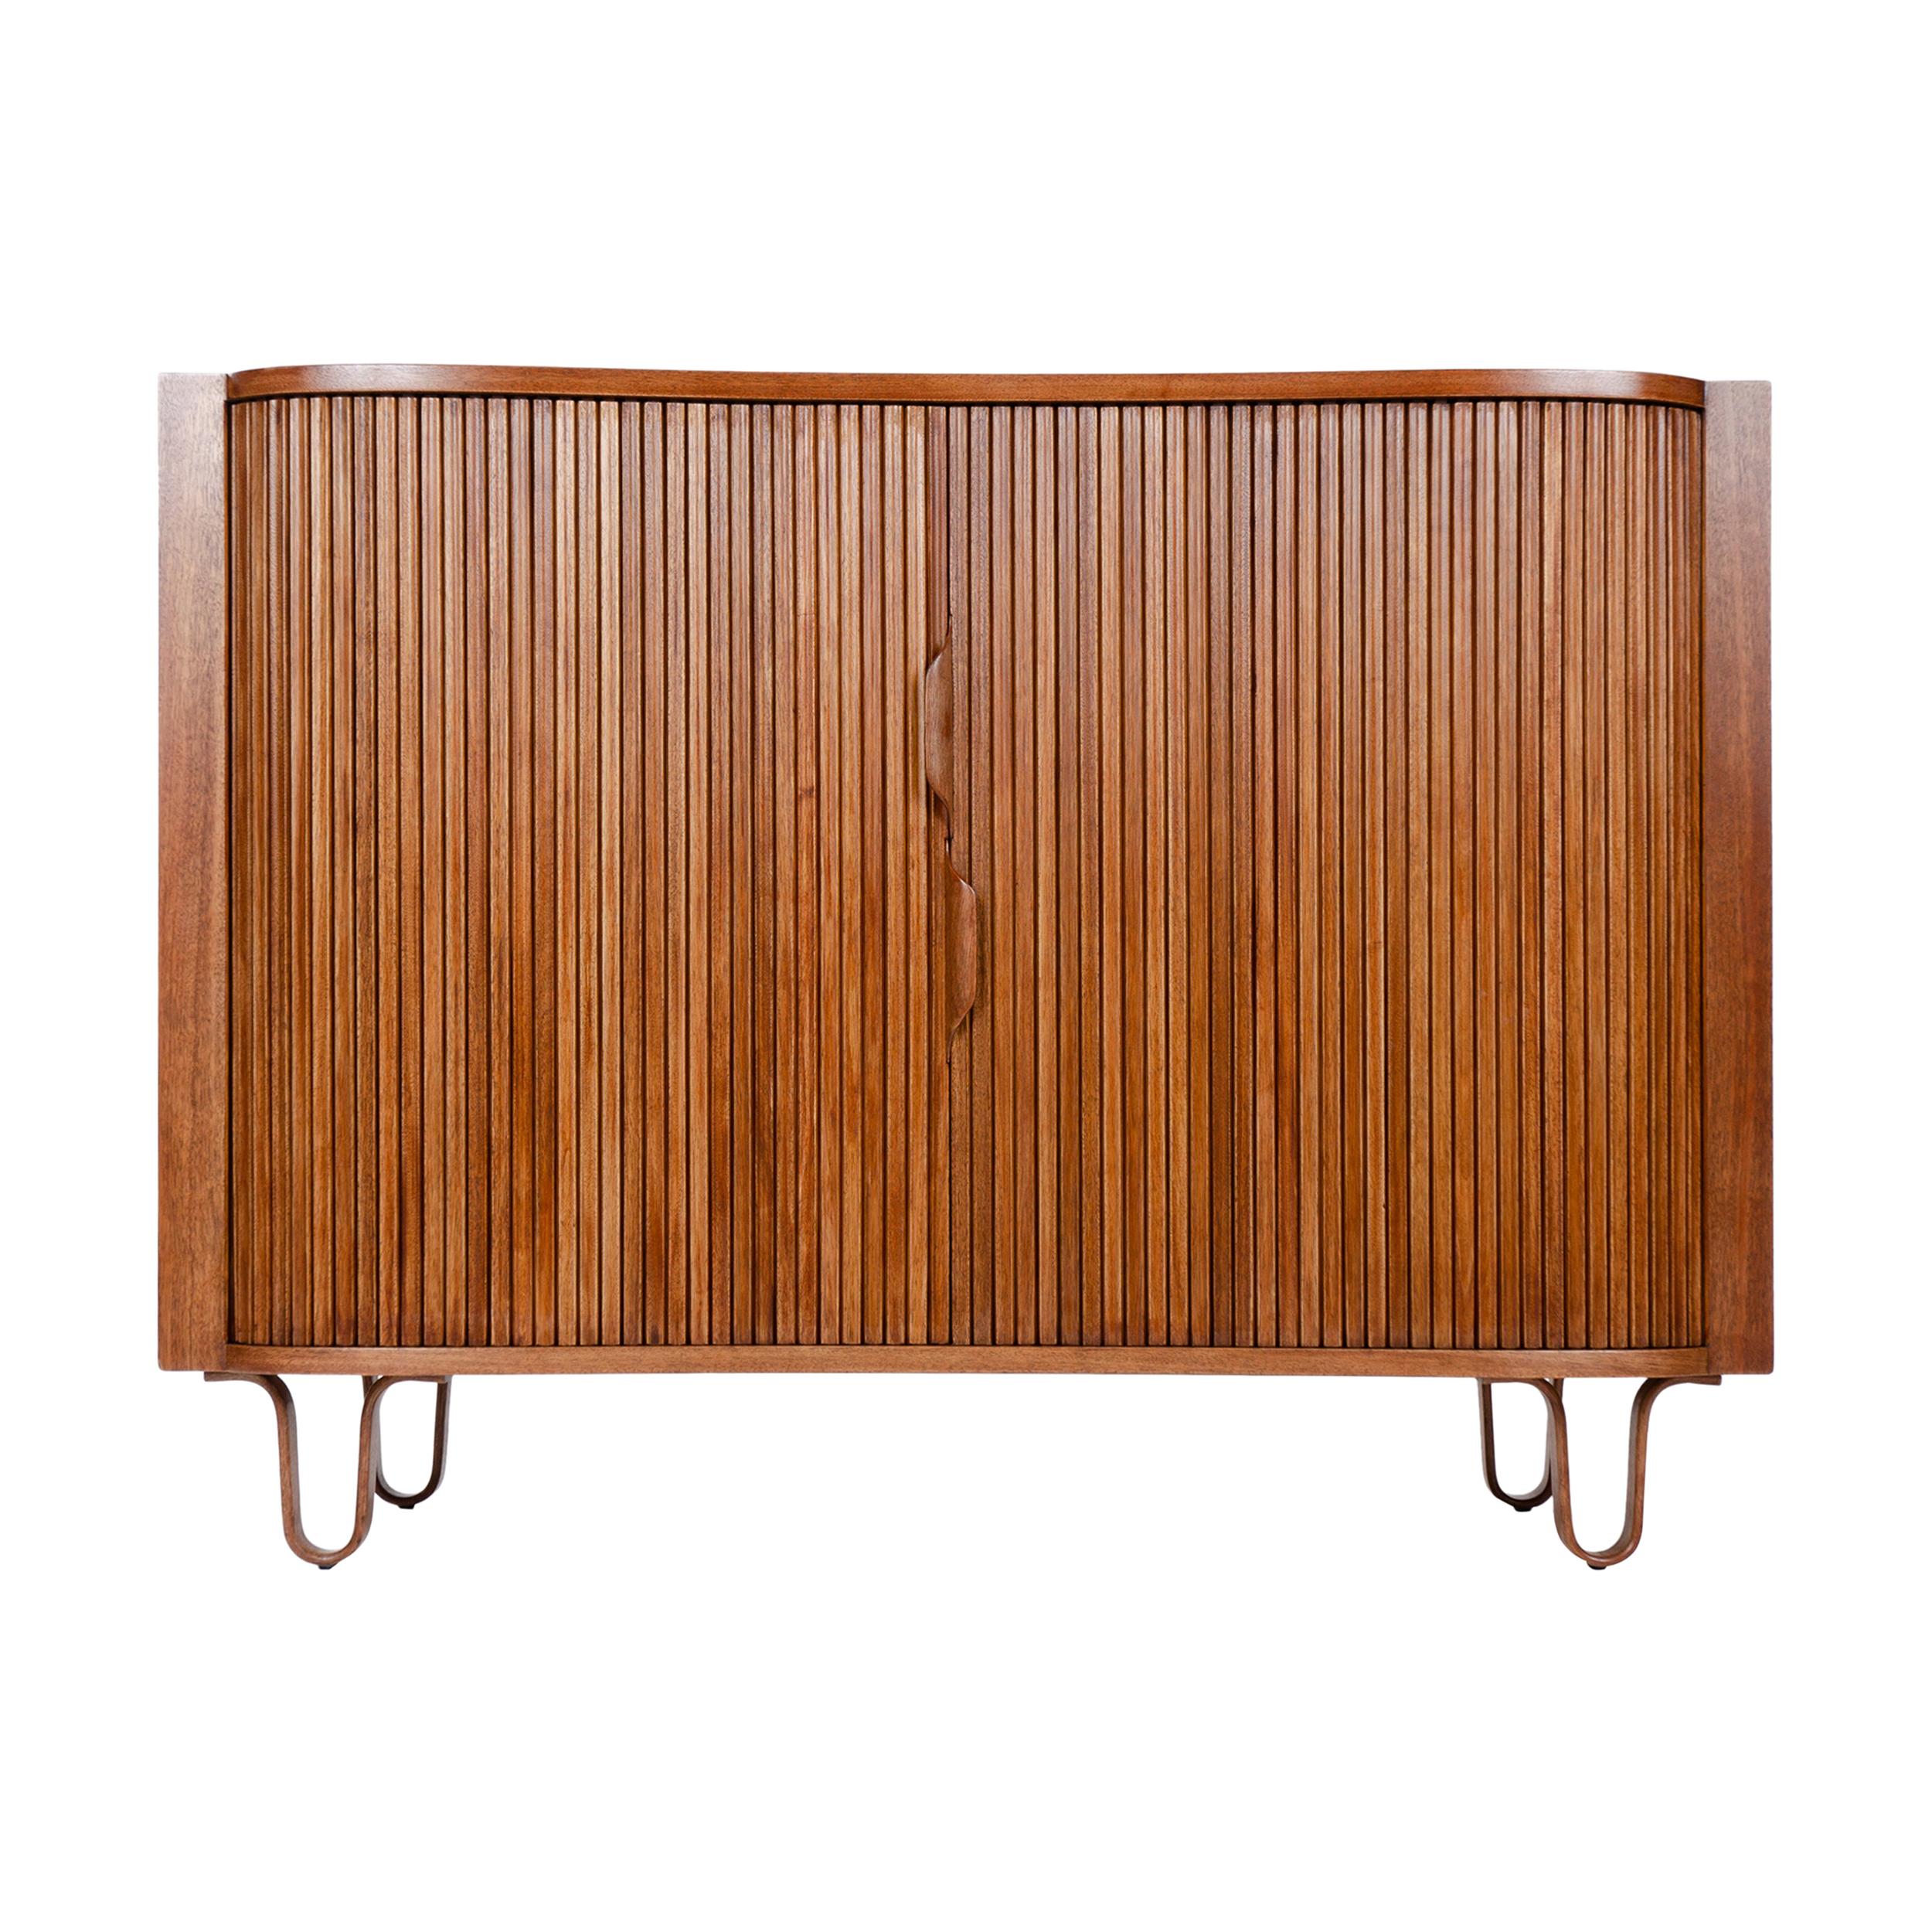 1950s Mister Cabinet in Mahogany by Edward Wormley for Dunbar